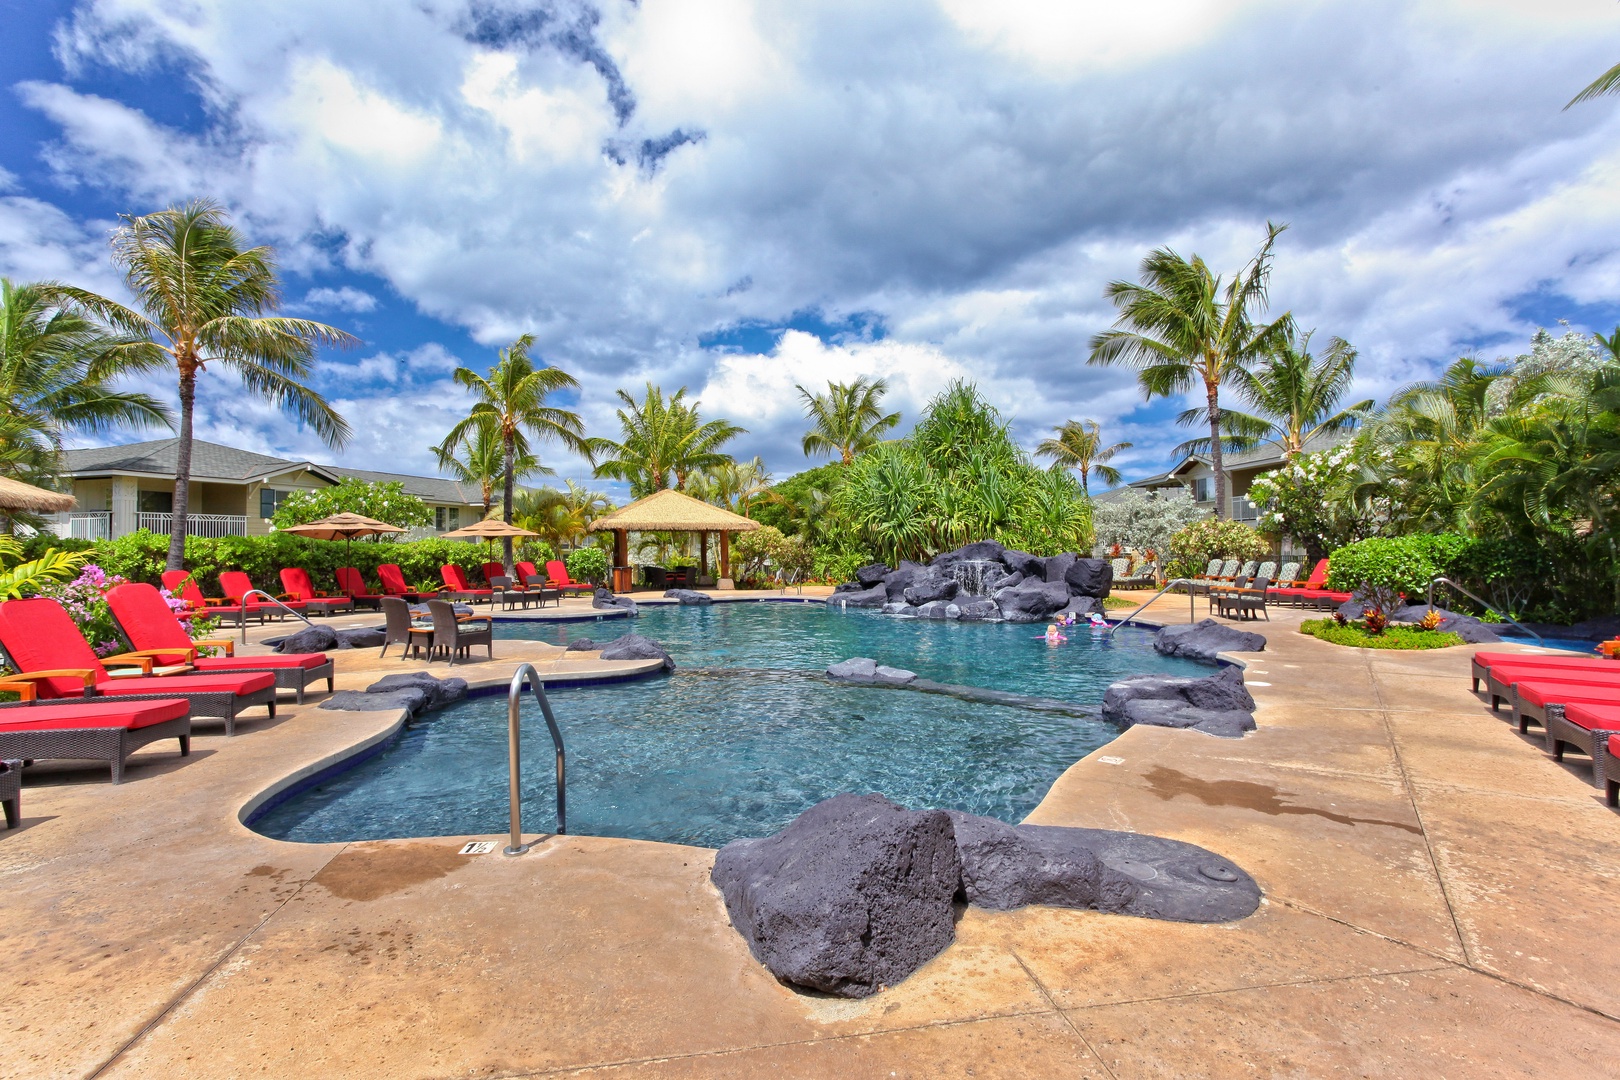 Kapolei Vacation Rentals, Ko Olina Kai 1047B - Rest and renew in the lounge chairs around the pool.